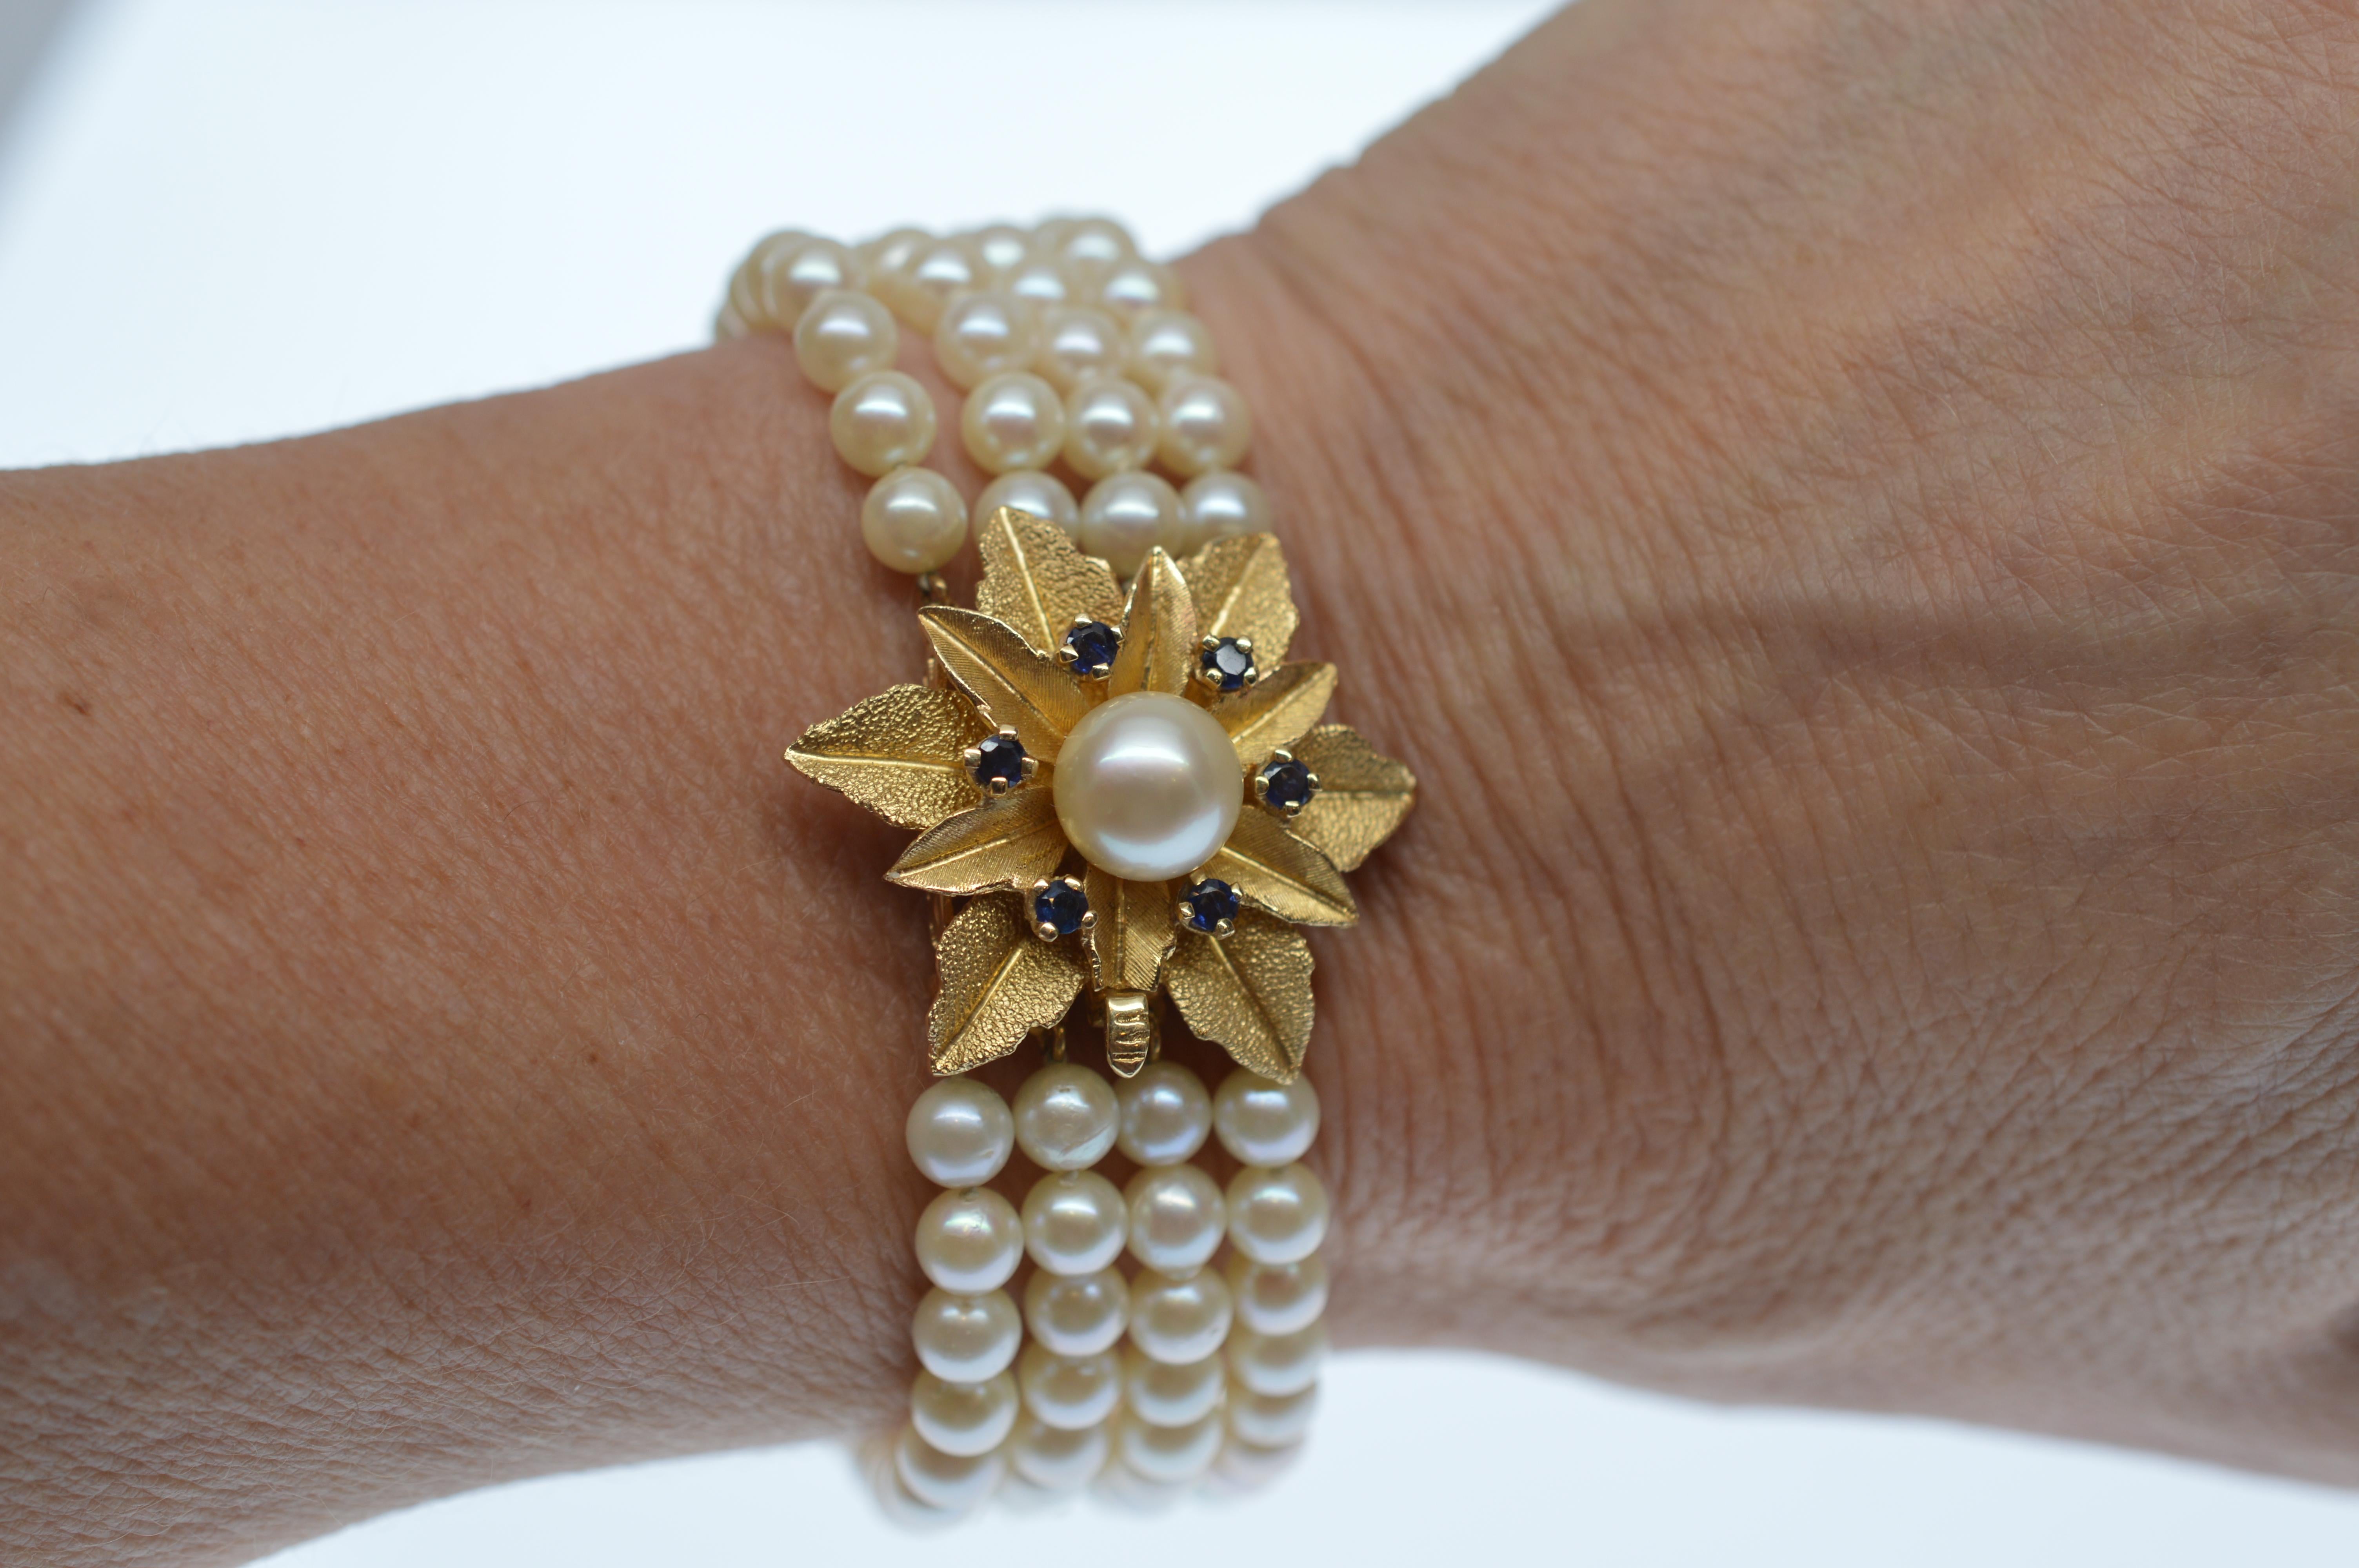 Multi Strand Pearl Bracelet w 14K Gold & Sapphire Floral Burst Clasp In Excellent Condition For Sale In Mount Kisco, NY